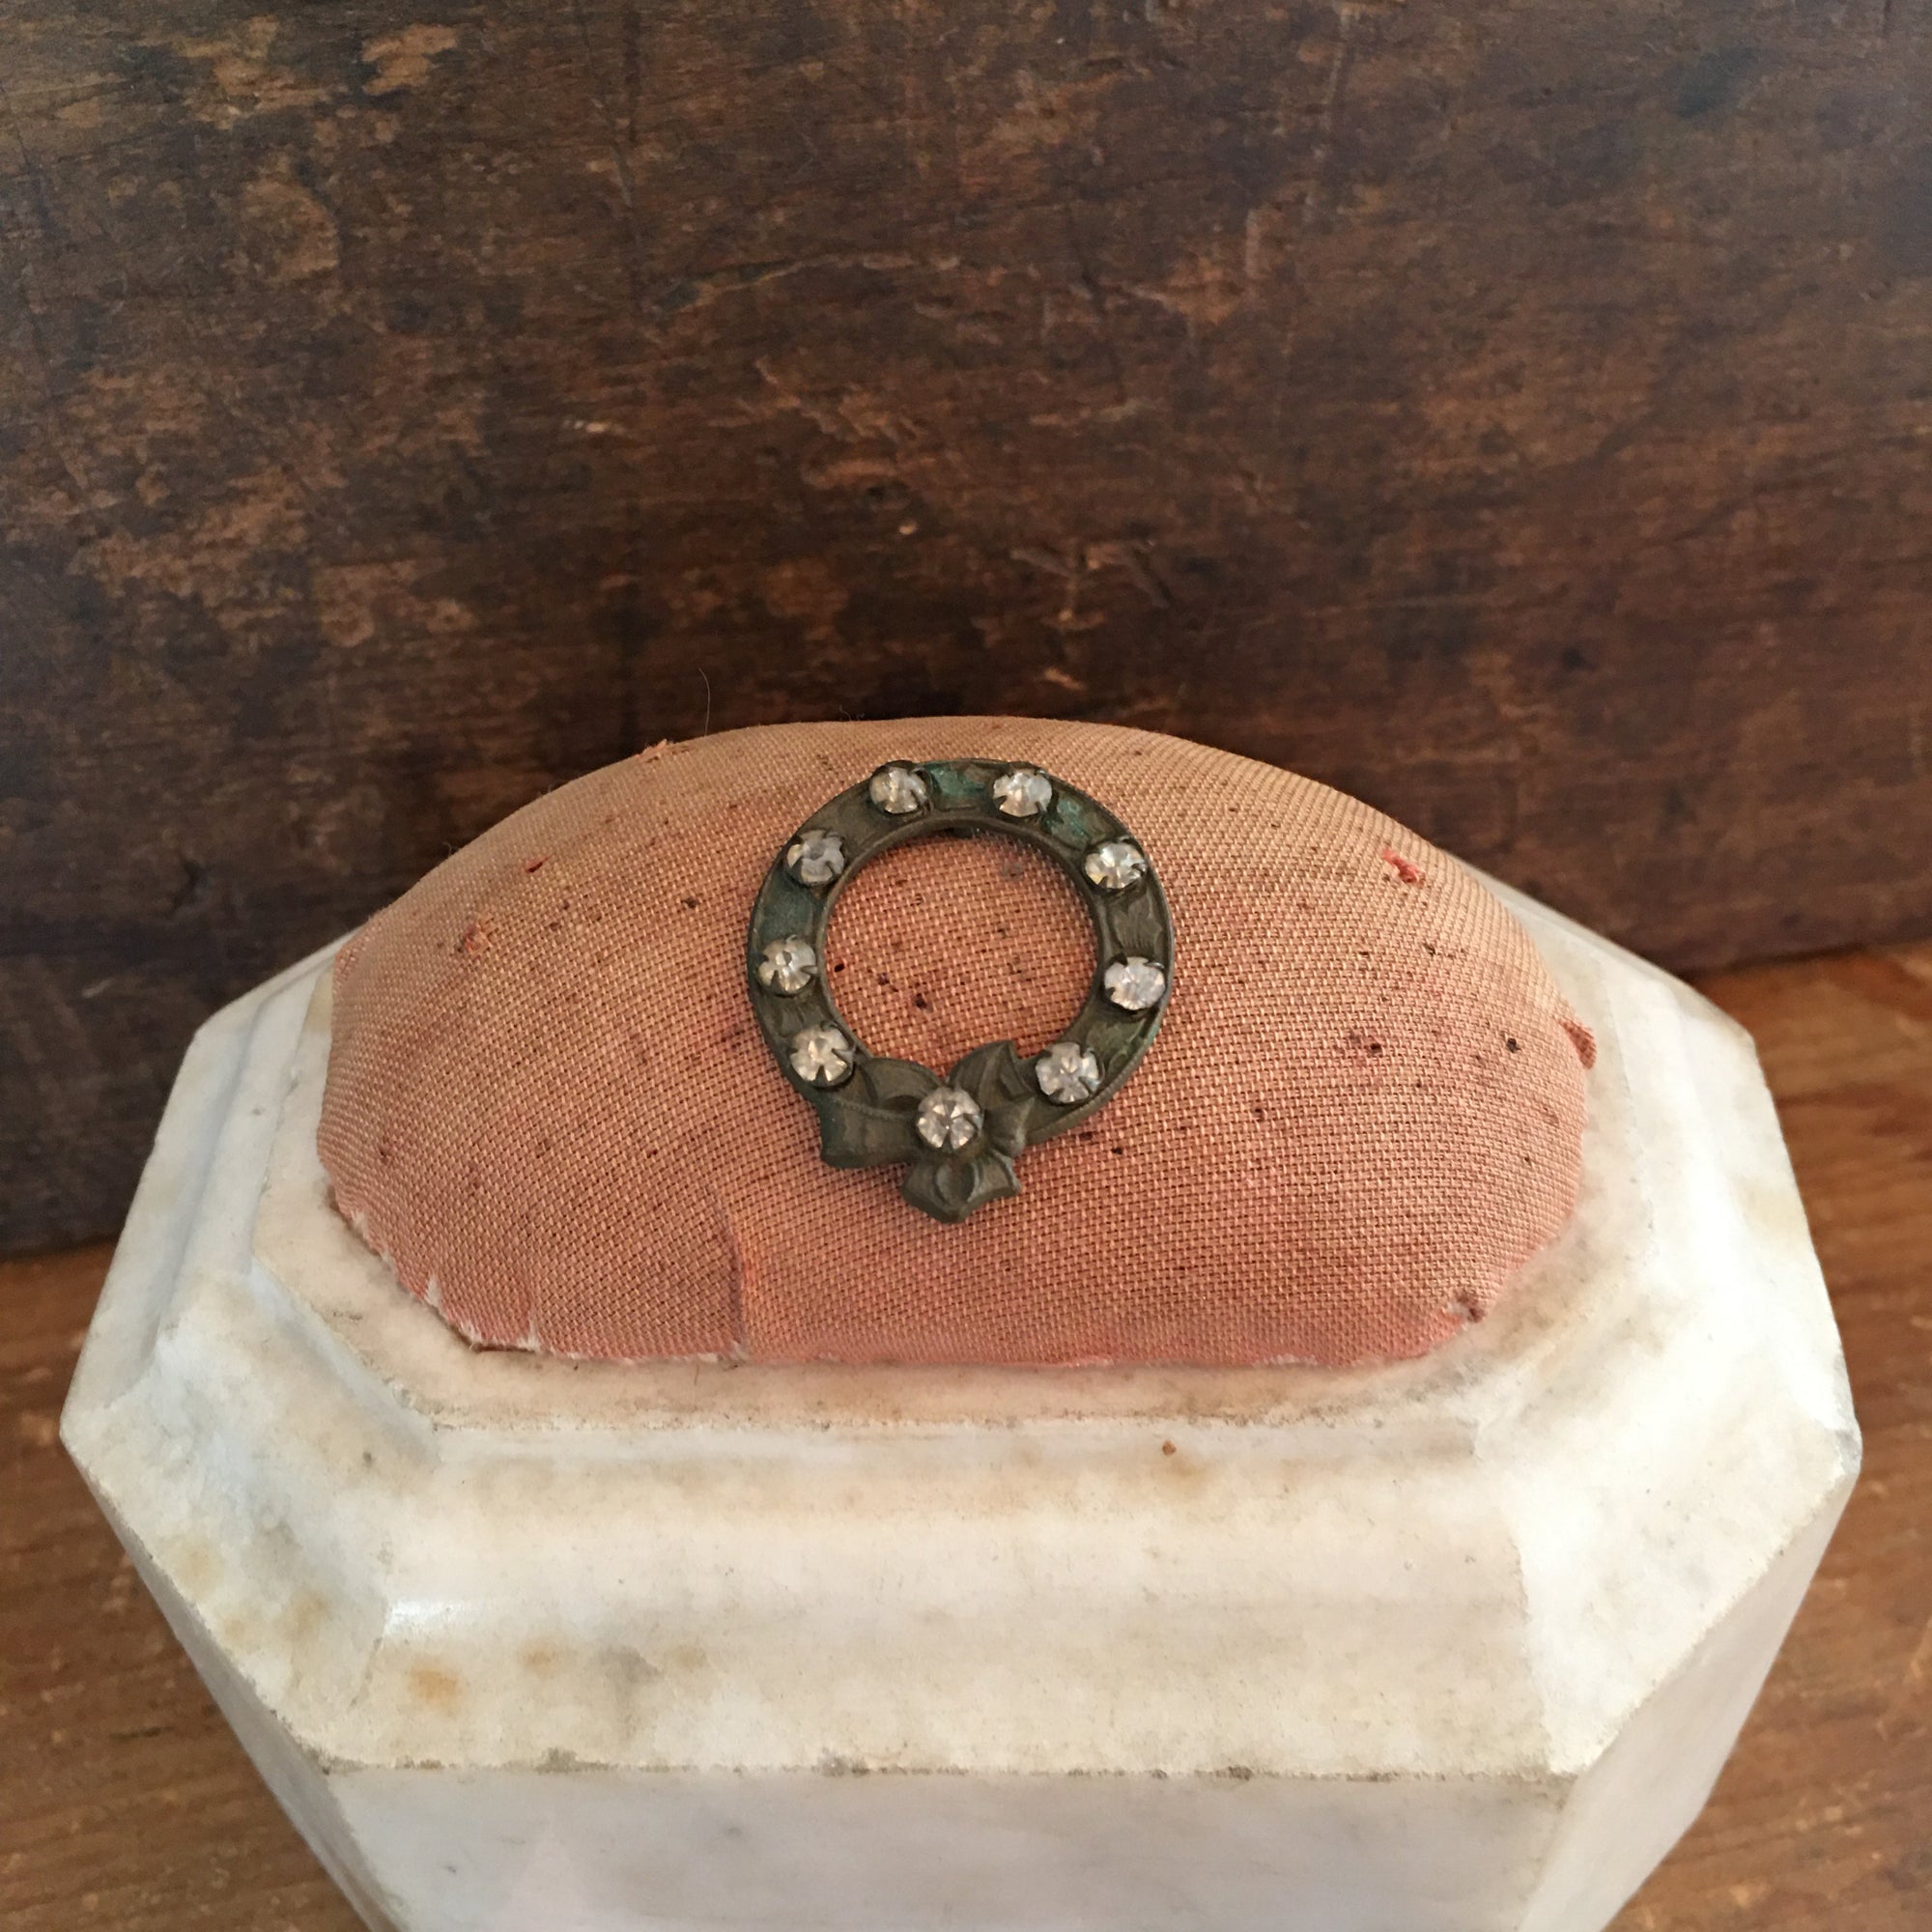 Antique Marble Base Pin Cushion with Original Cushion, Brooch Included